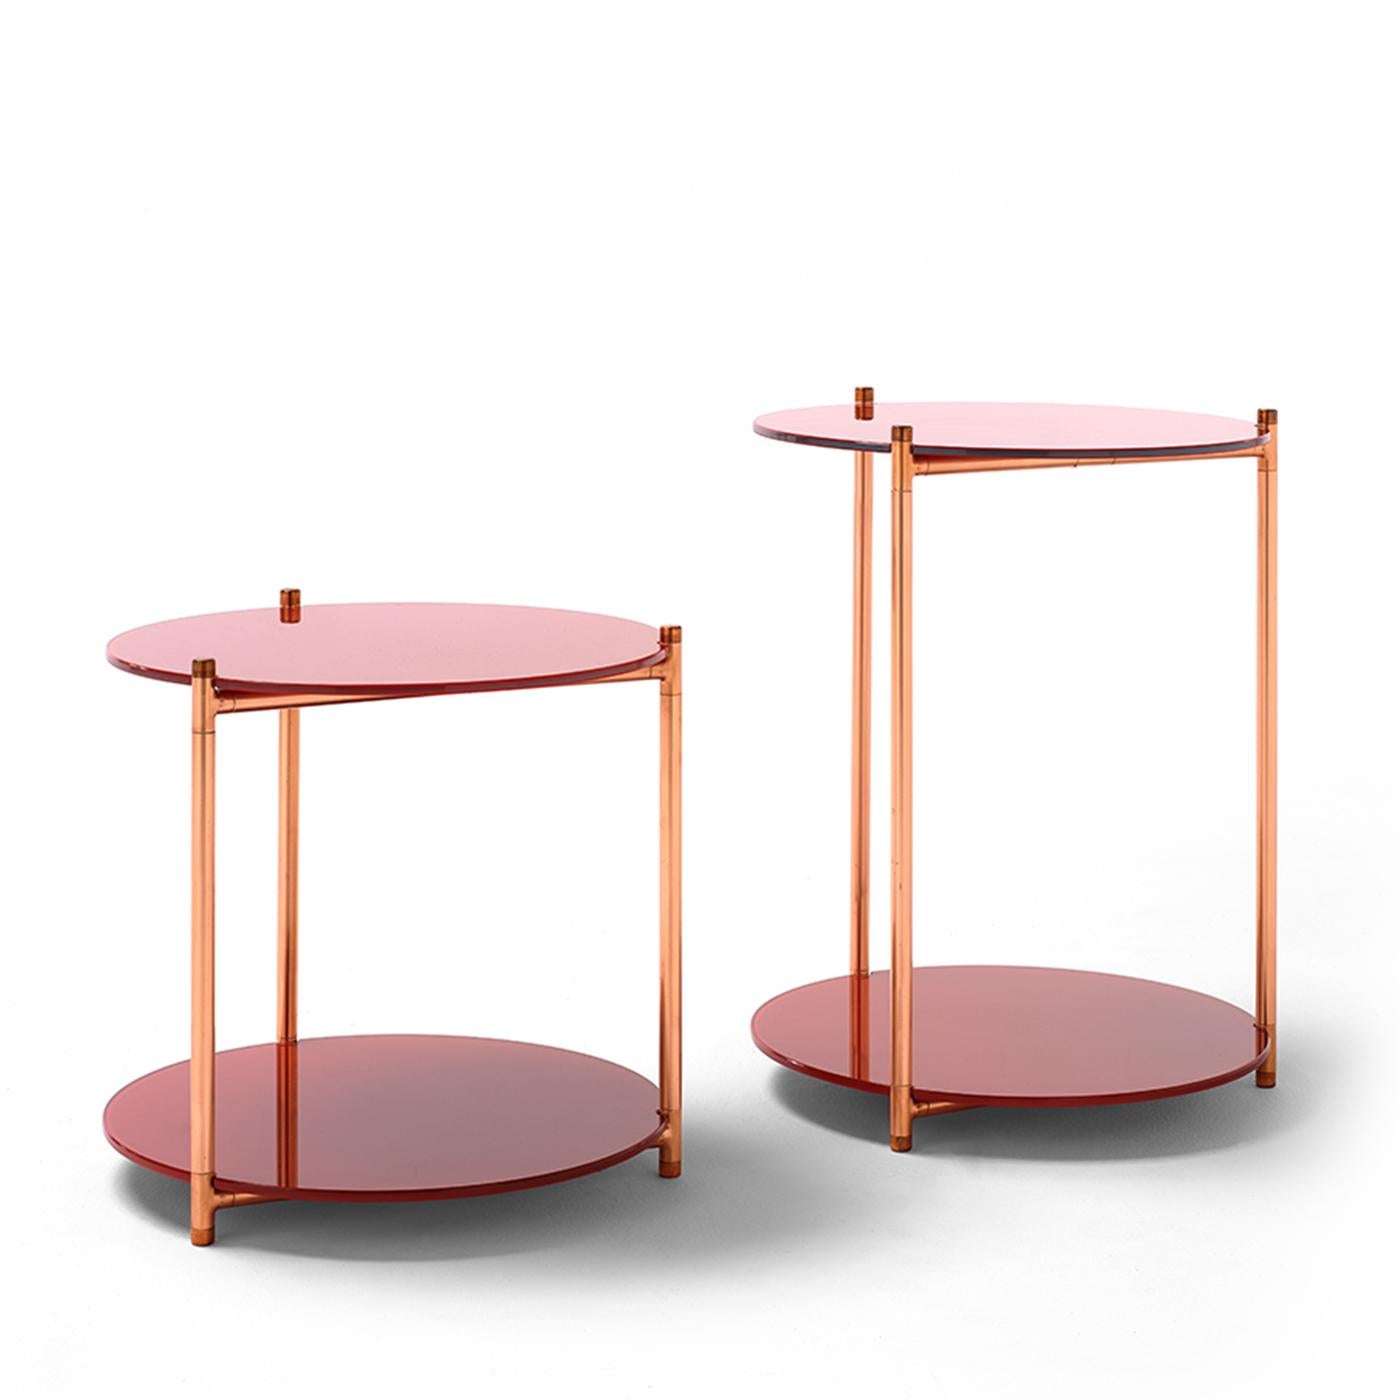 The luminosity of copper blends with the reflective quality of back-painted glass in this enchanting side table inspired by the Long Playing Étagère. The cylindrical frame is made of steel on the inside and copper along the outside and consists of